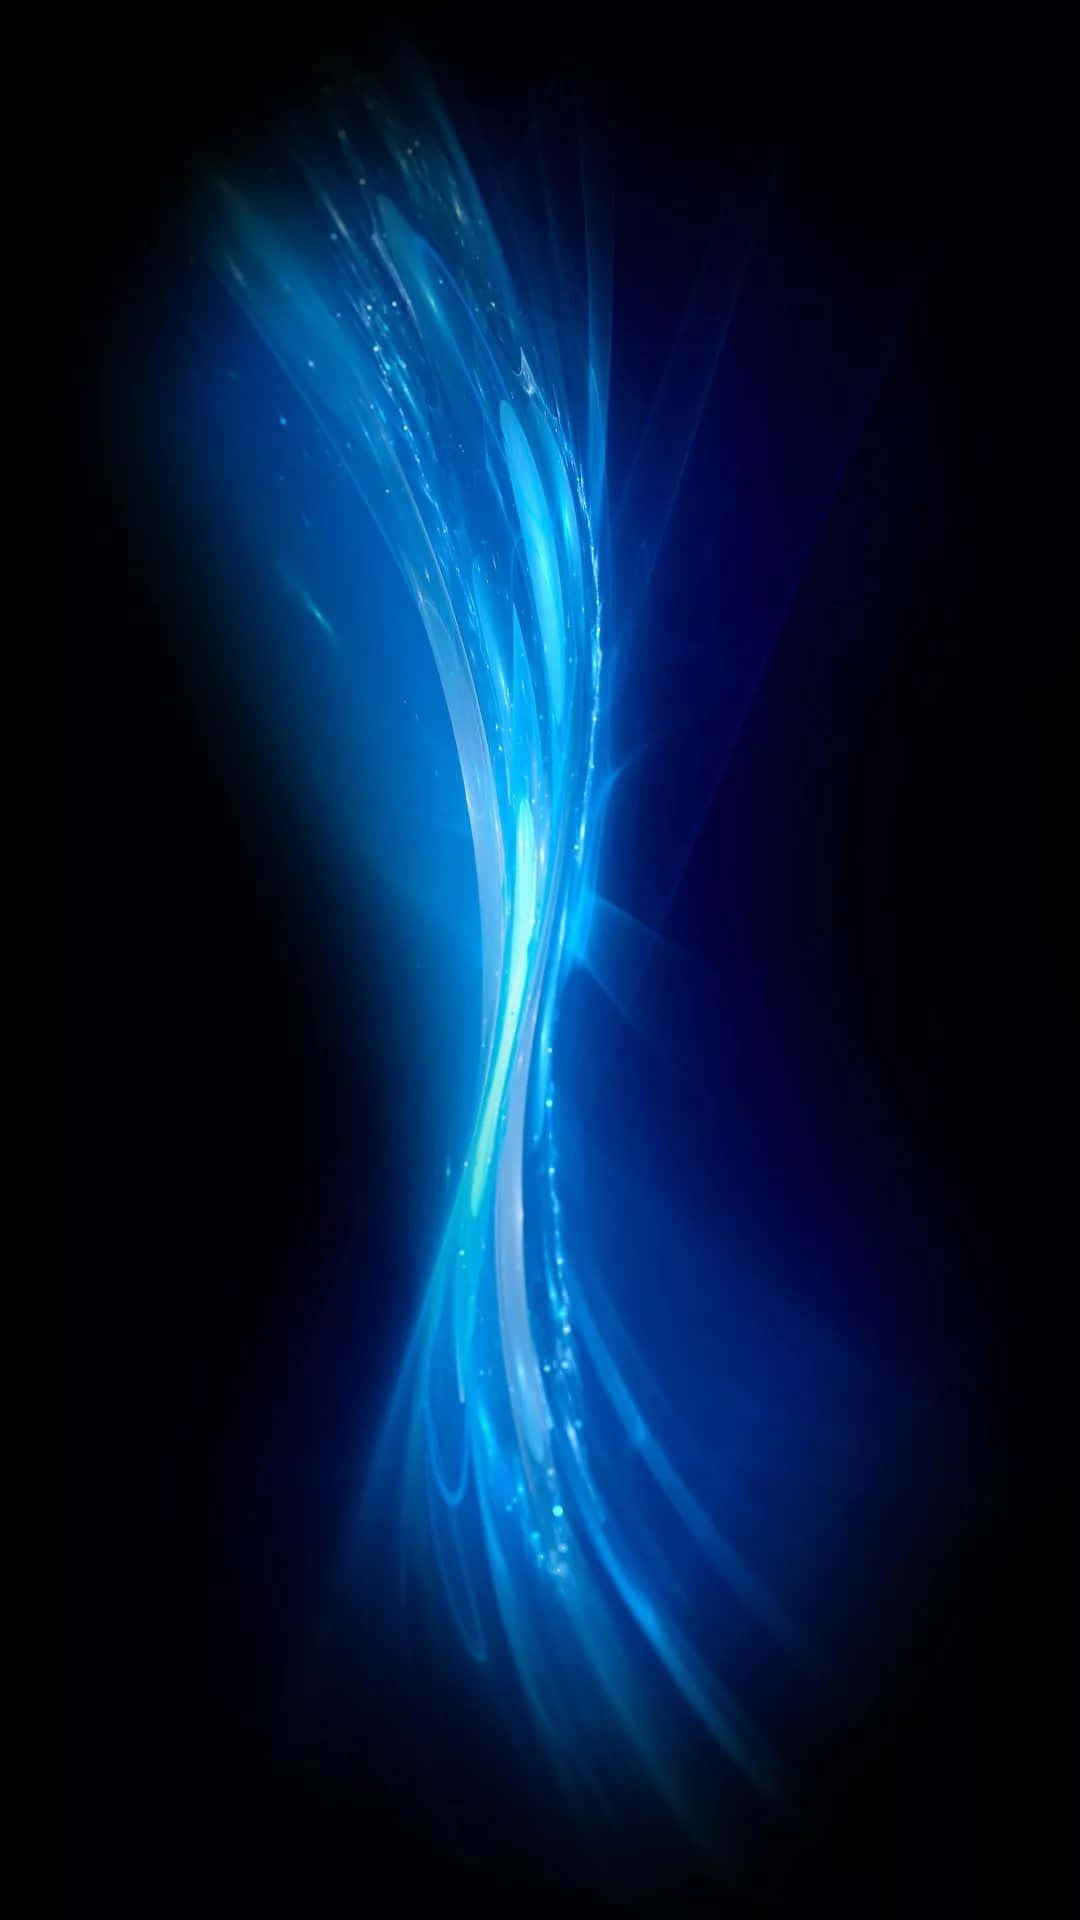 Solid Blue Iphone Wallpaper